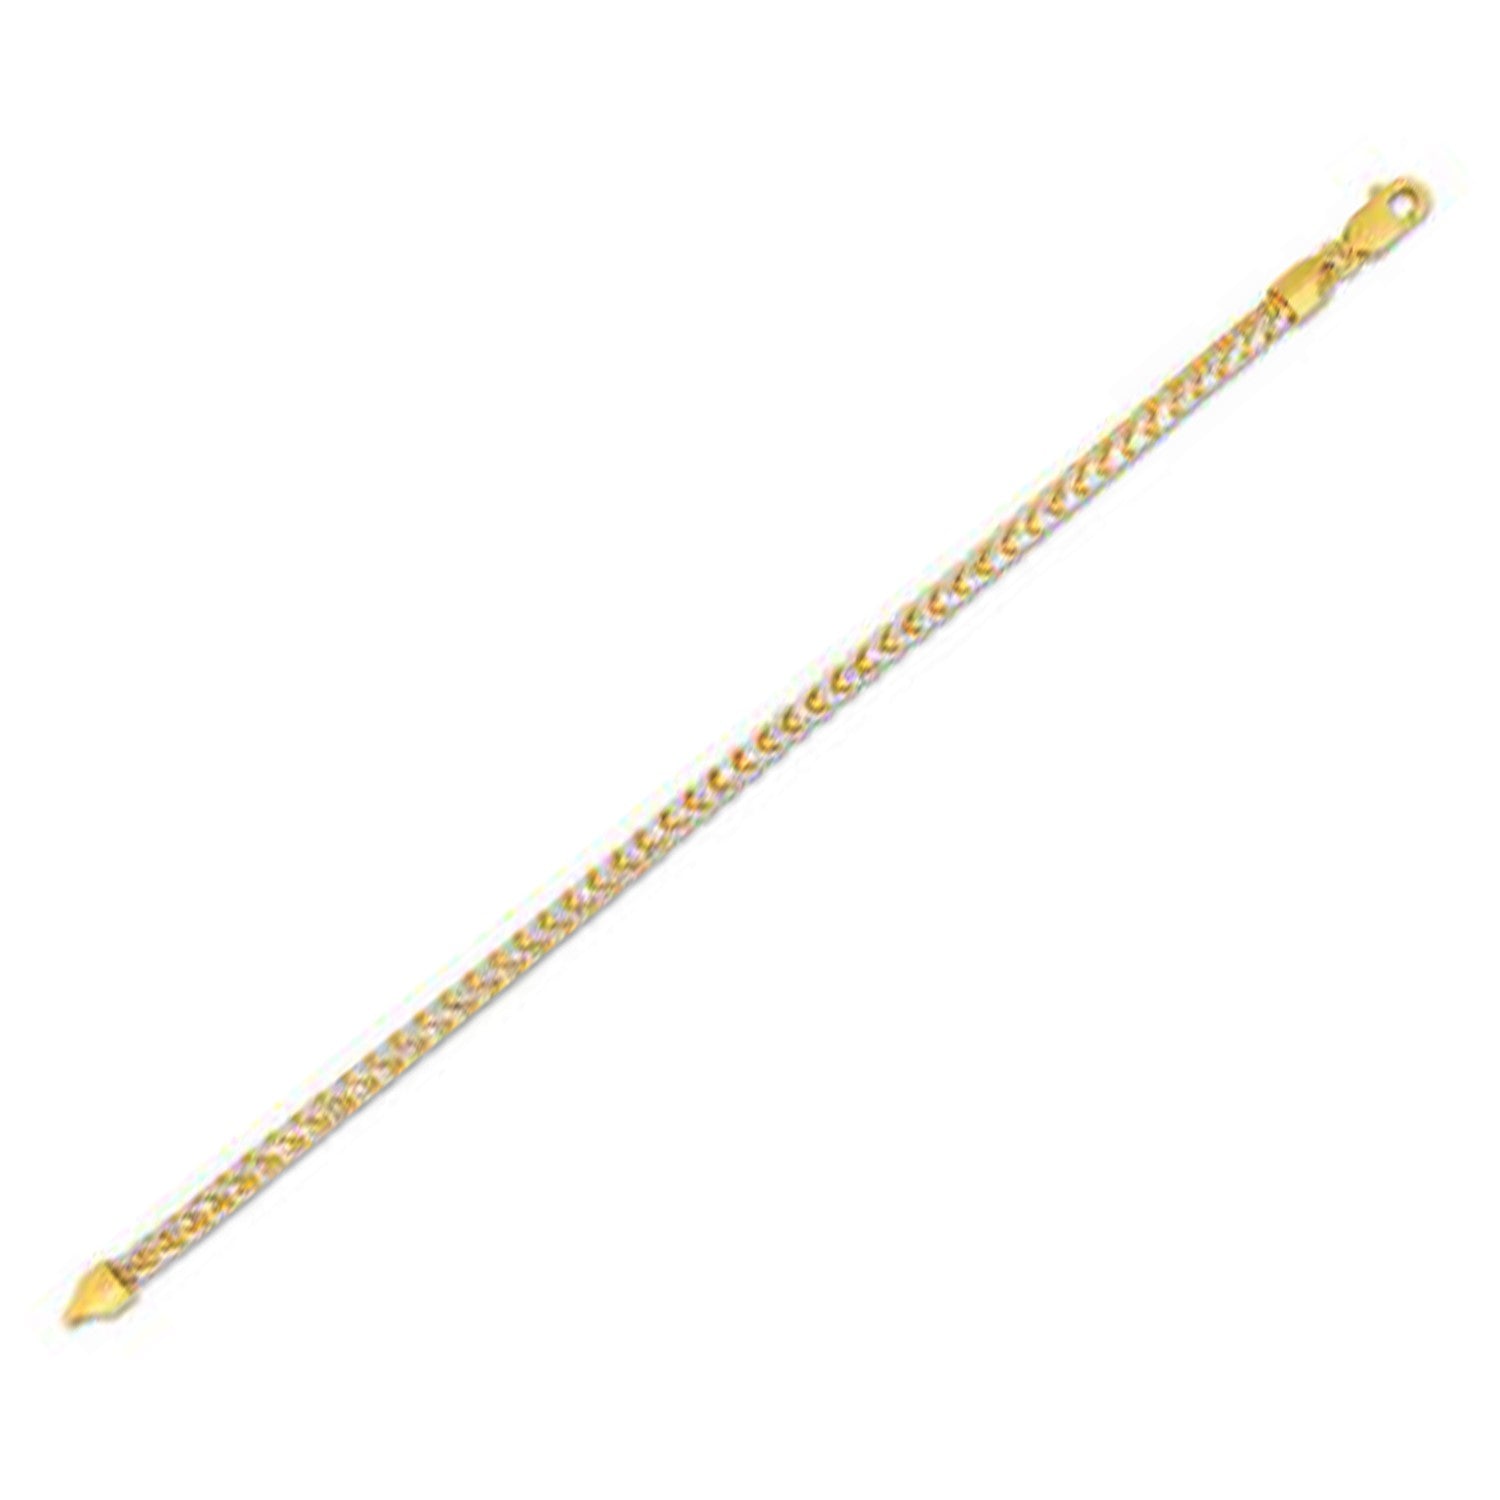 Round Pave Franco Chain Bracelet in 14k Yellow Gold (4.0 mm)